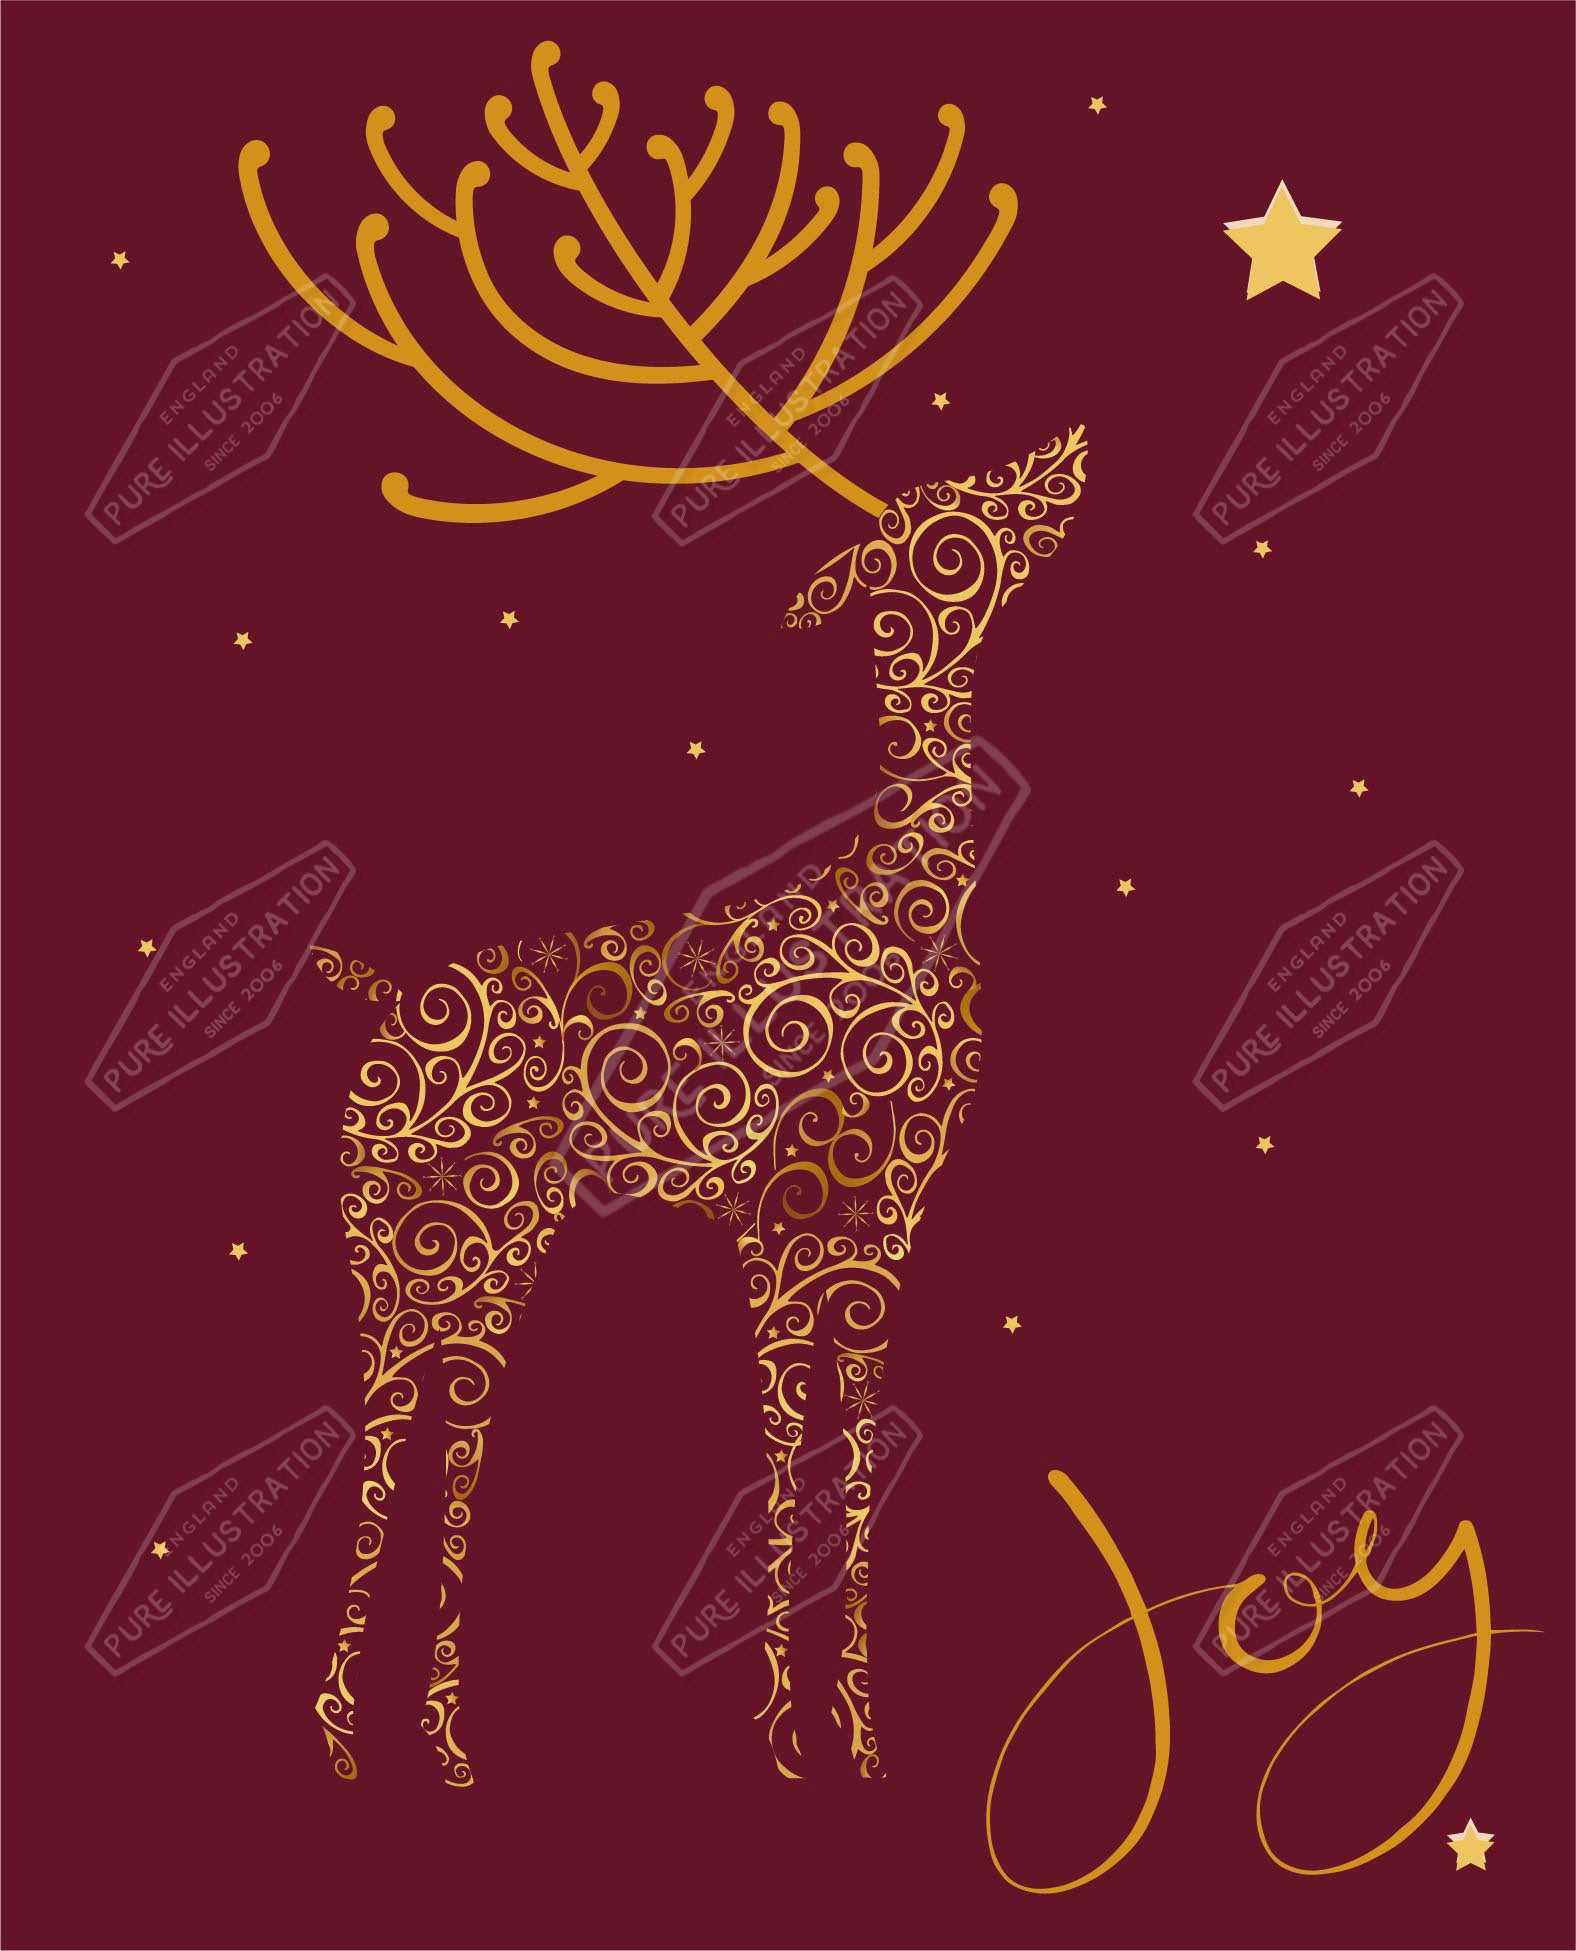 00035275SPI- Sarah Pitt is represented by Pure Art Licensing Agency - Christmas Greeting Card Design